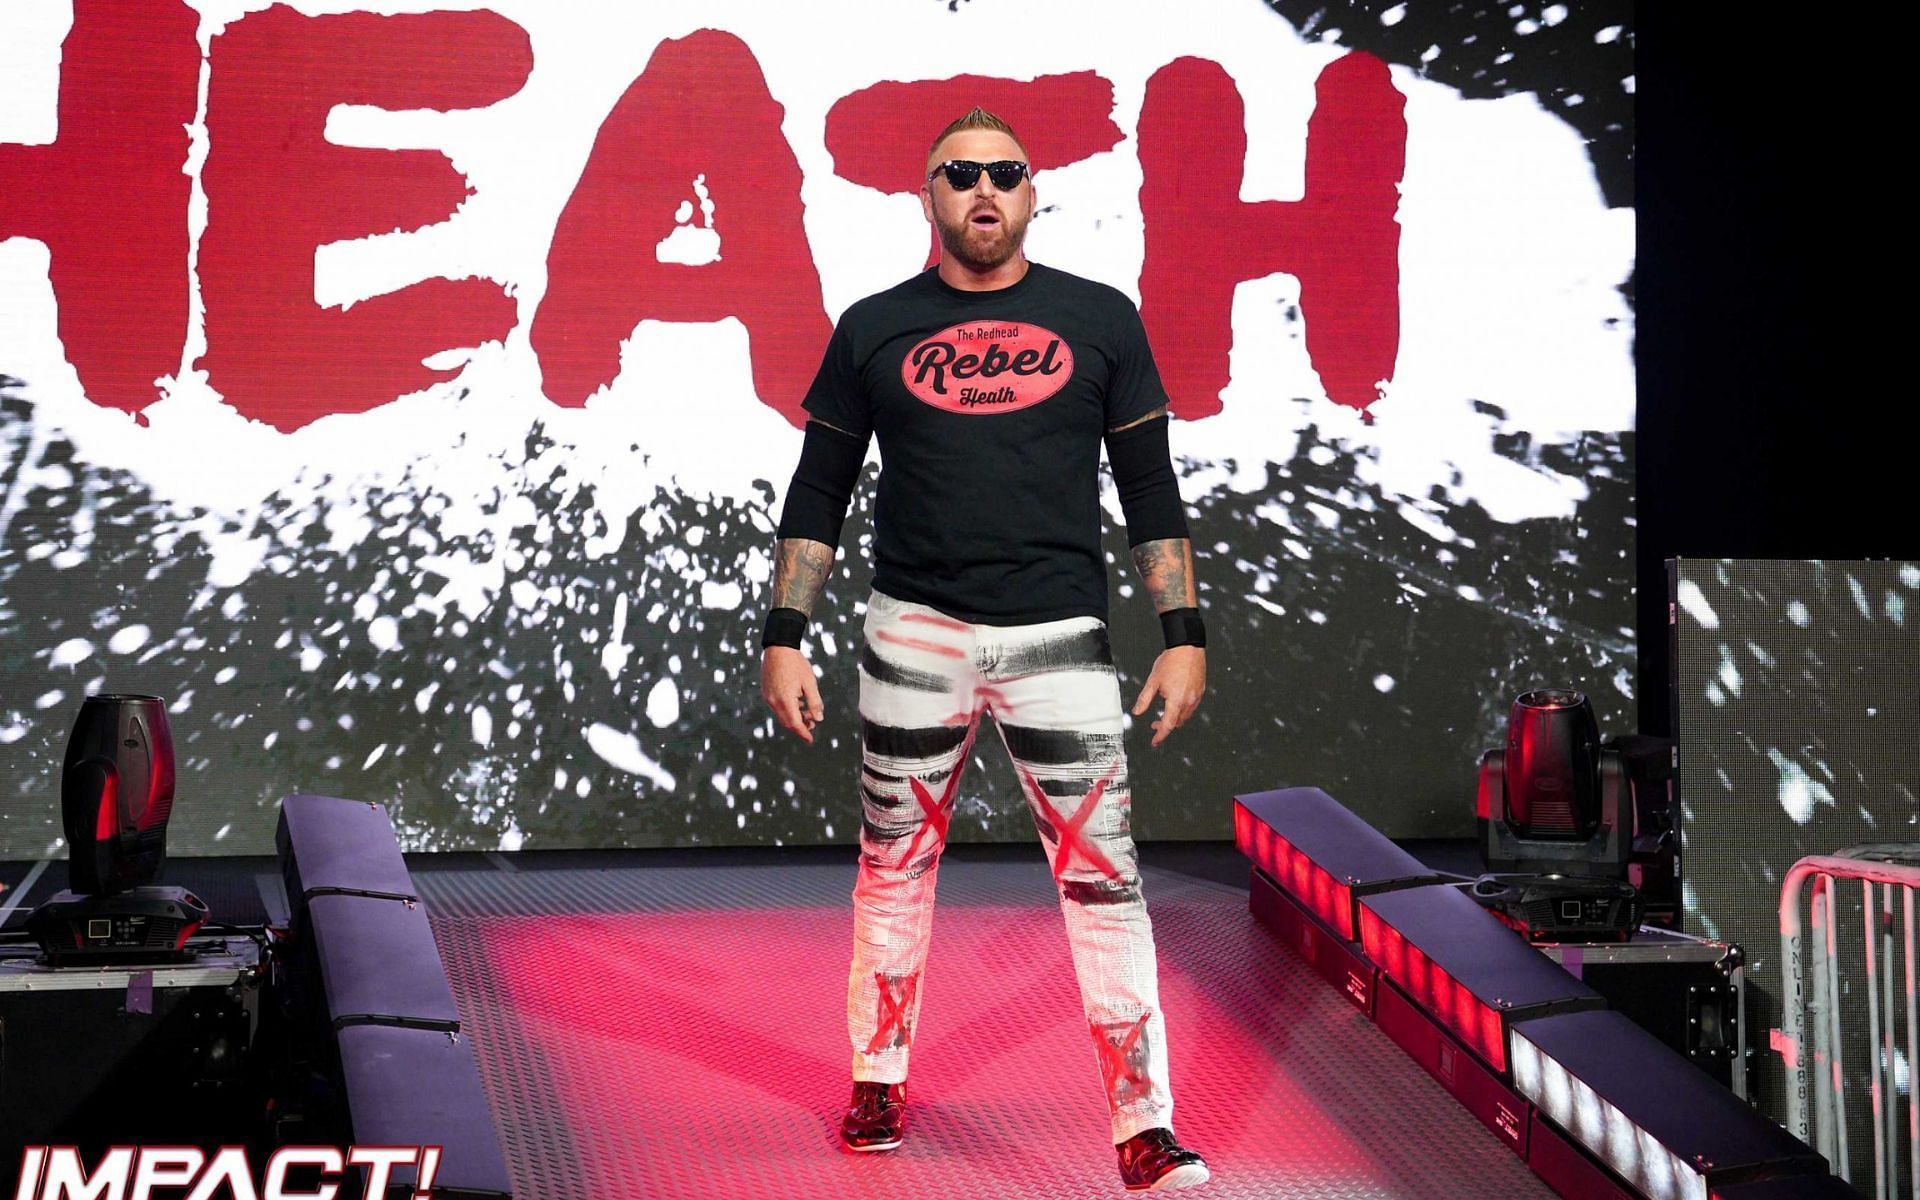 Heath Slater has been spending most of his post-WWE time with TNA/IMPACT.